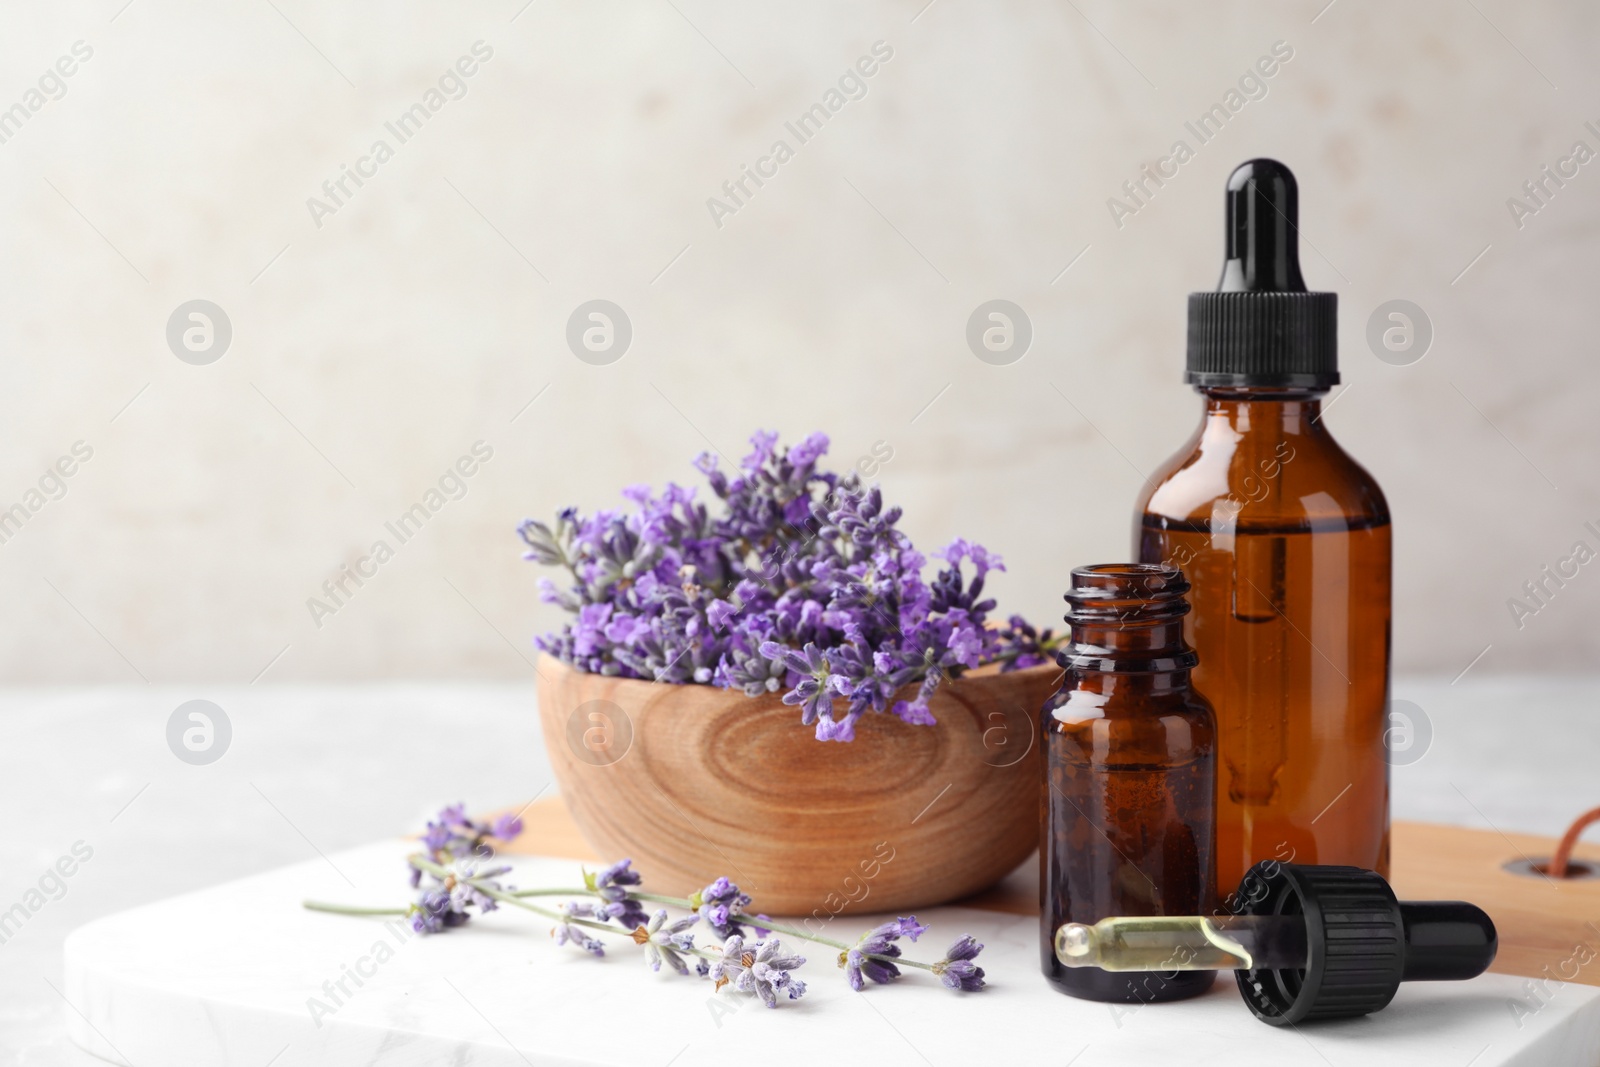 Photo of Bottles with natural essential oil and bowl of lavender flowers on table against light background. Space for text